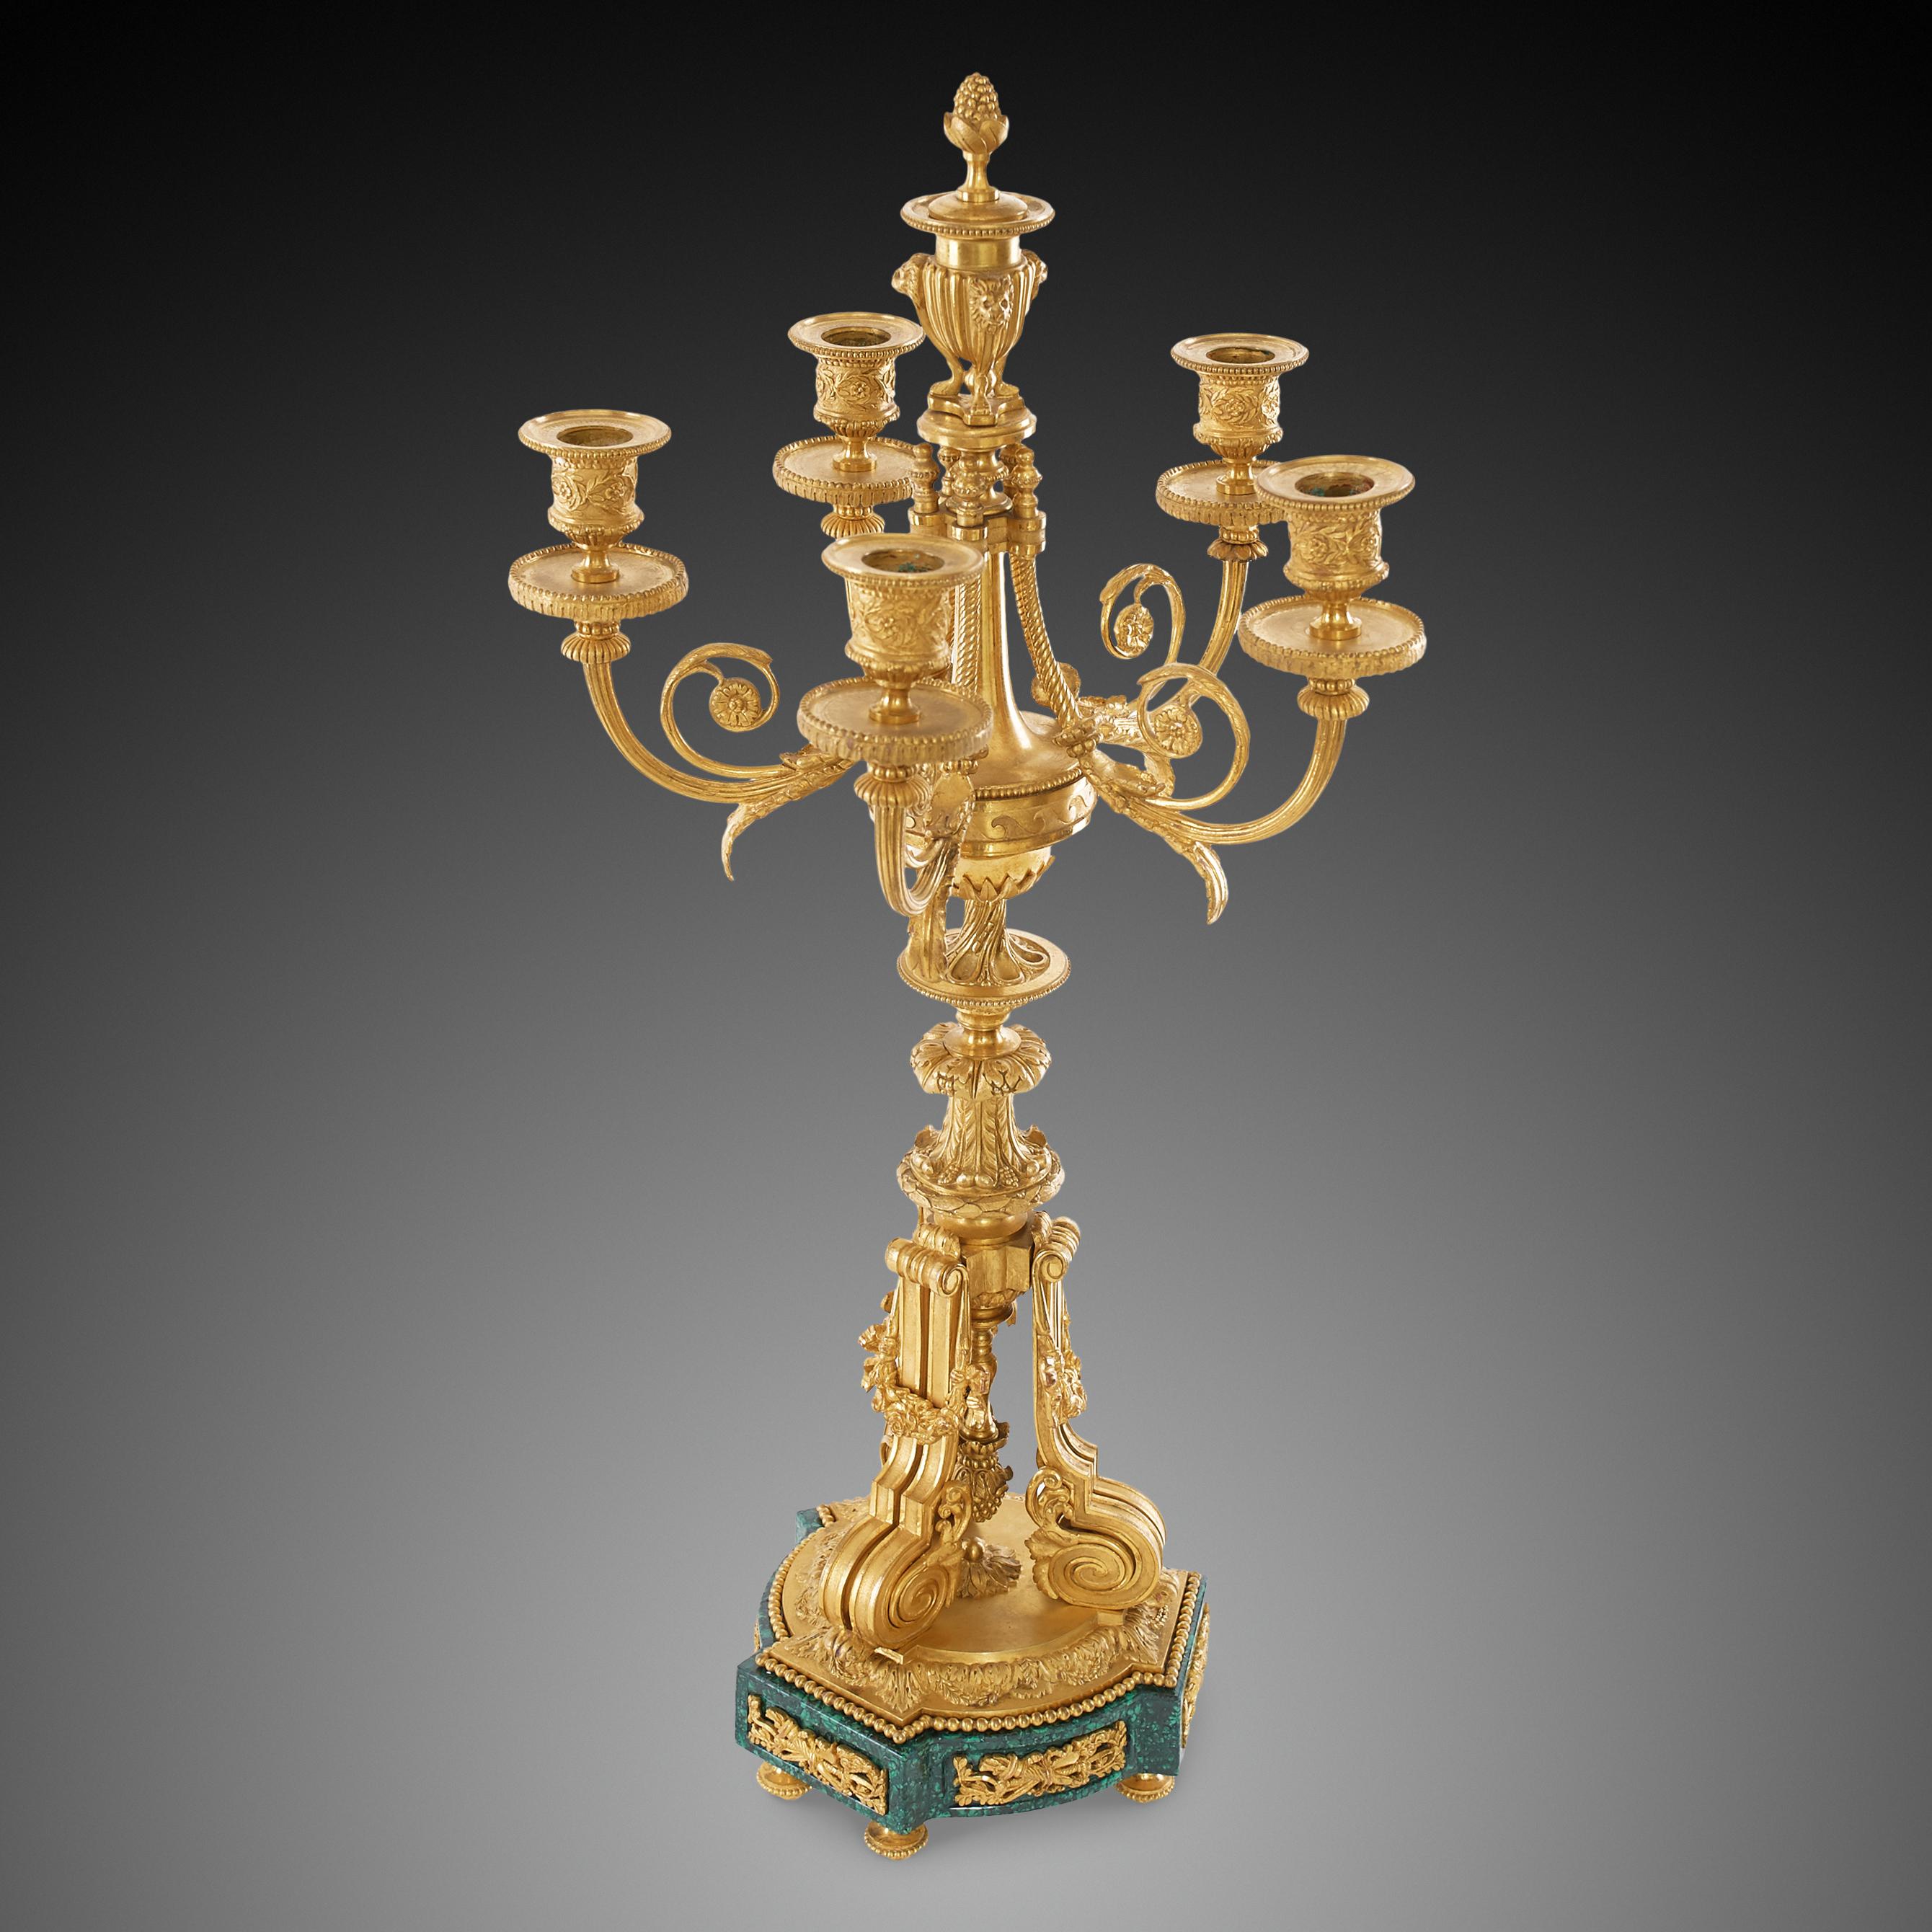 This pair are fine examples of the Louis XVI style.Five arm candlesticks finished with precision and craftsmanship. The brackets support the richly adorned lamp-form ormolu body of the candelabrum.The base is made of beautiful malachite with a